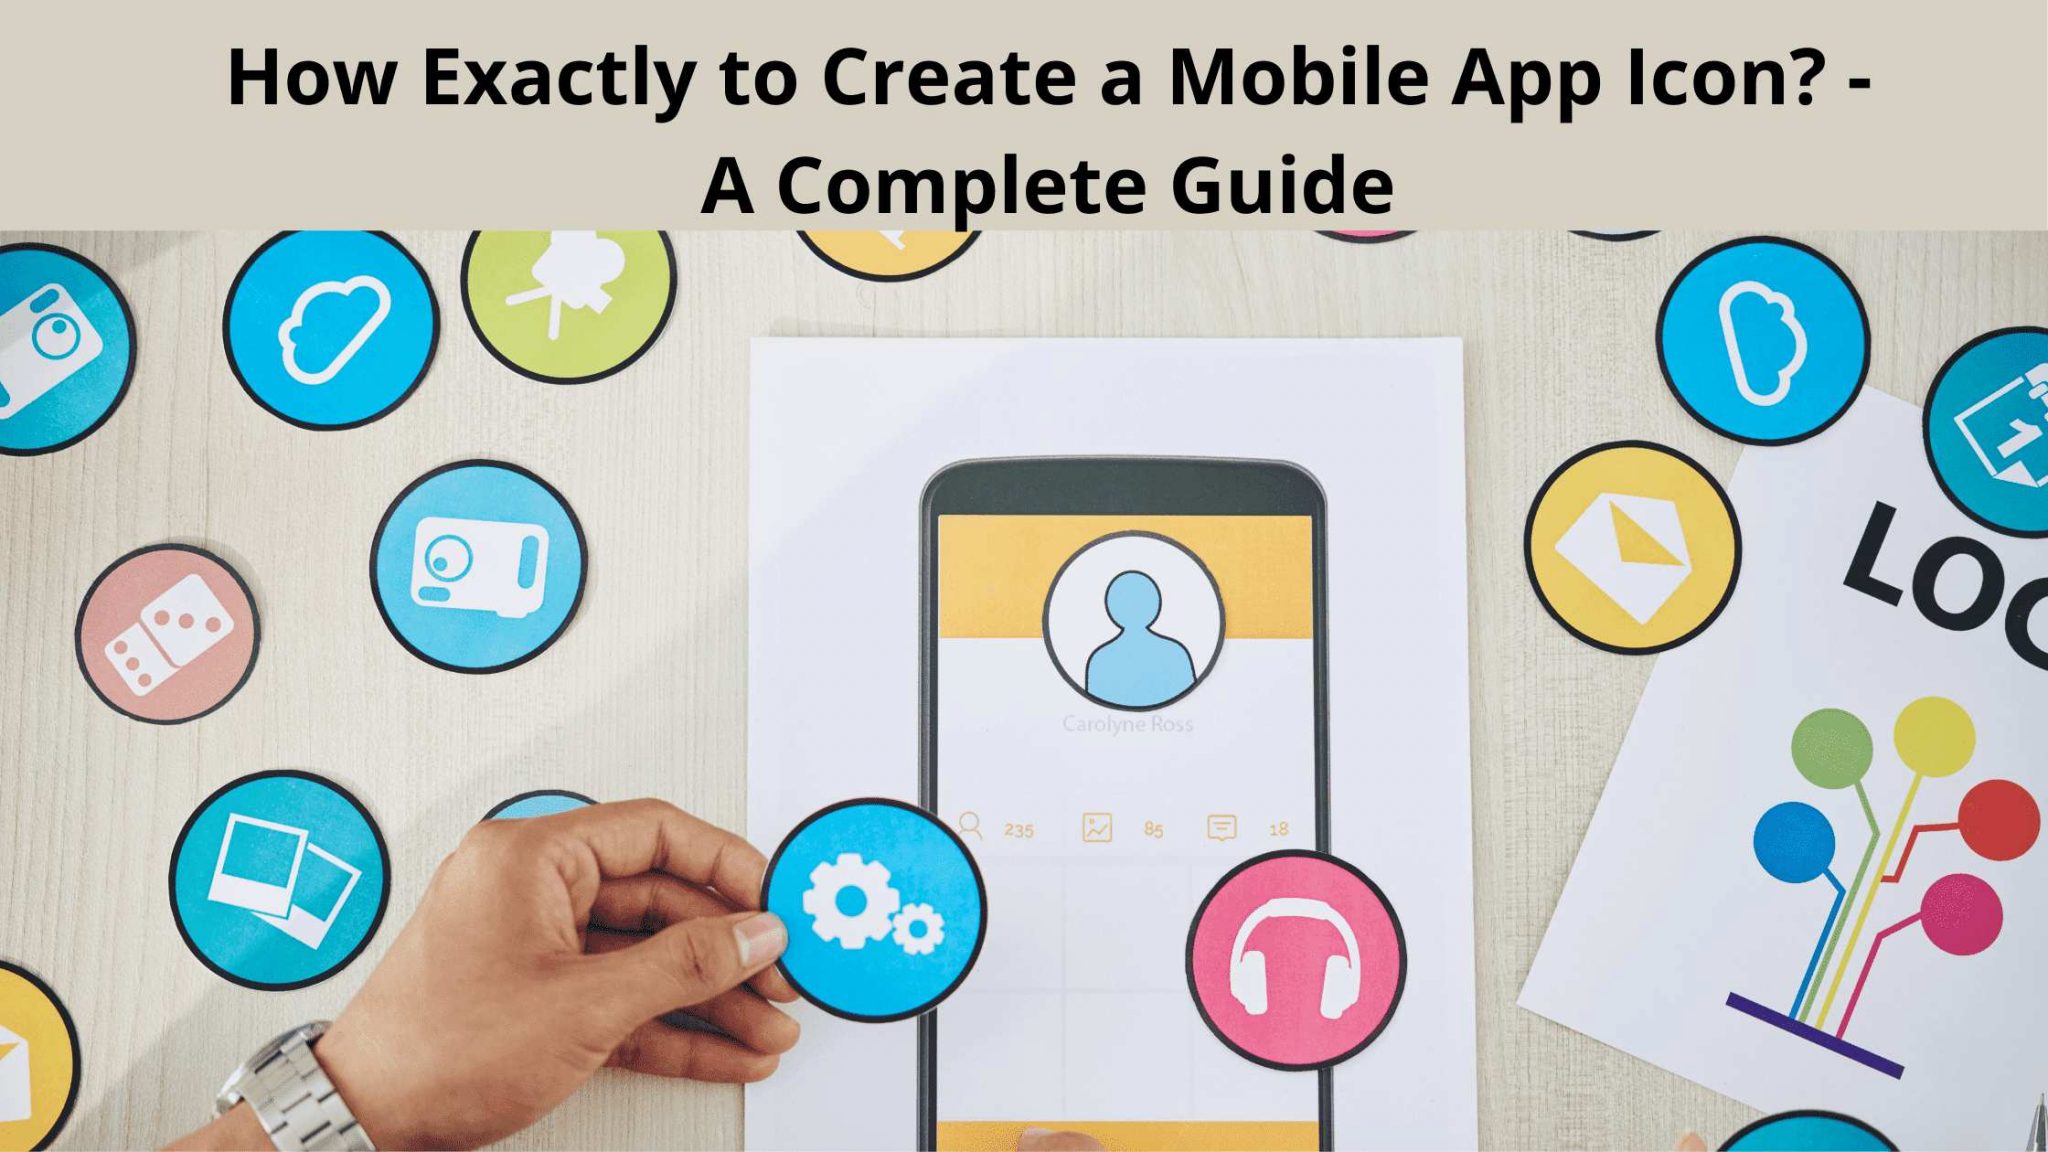 How to Design a Mobile App Icon? – A Complete Guide